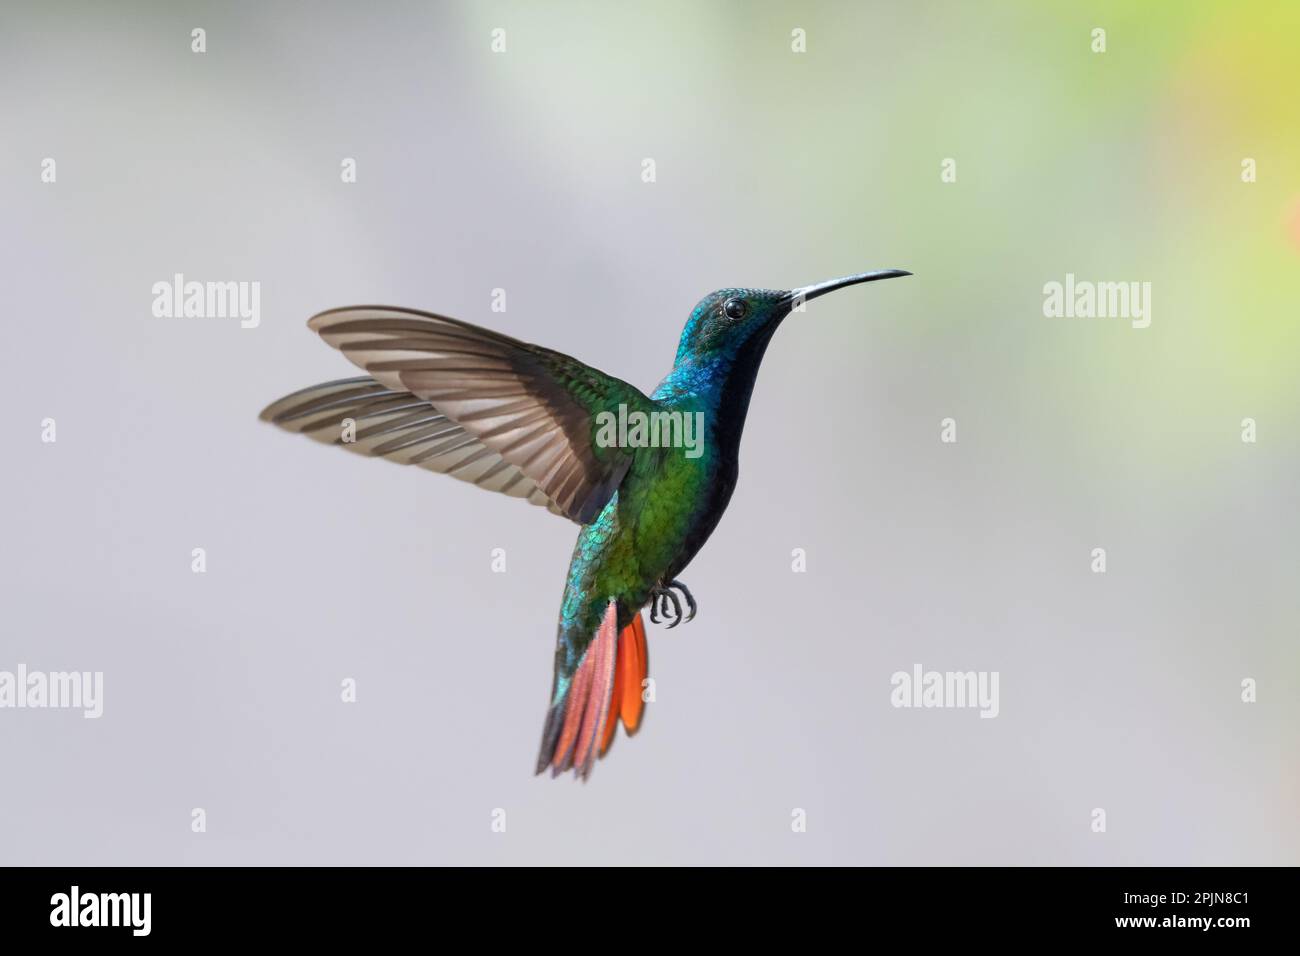 Colorful, Black-throated Mango hummingbird with orange tail hovering against a gray background. Stock Photo